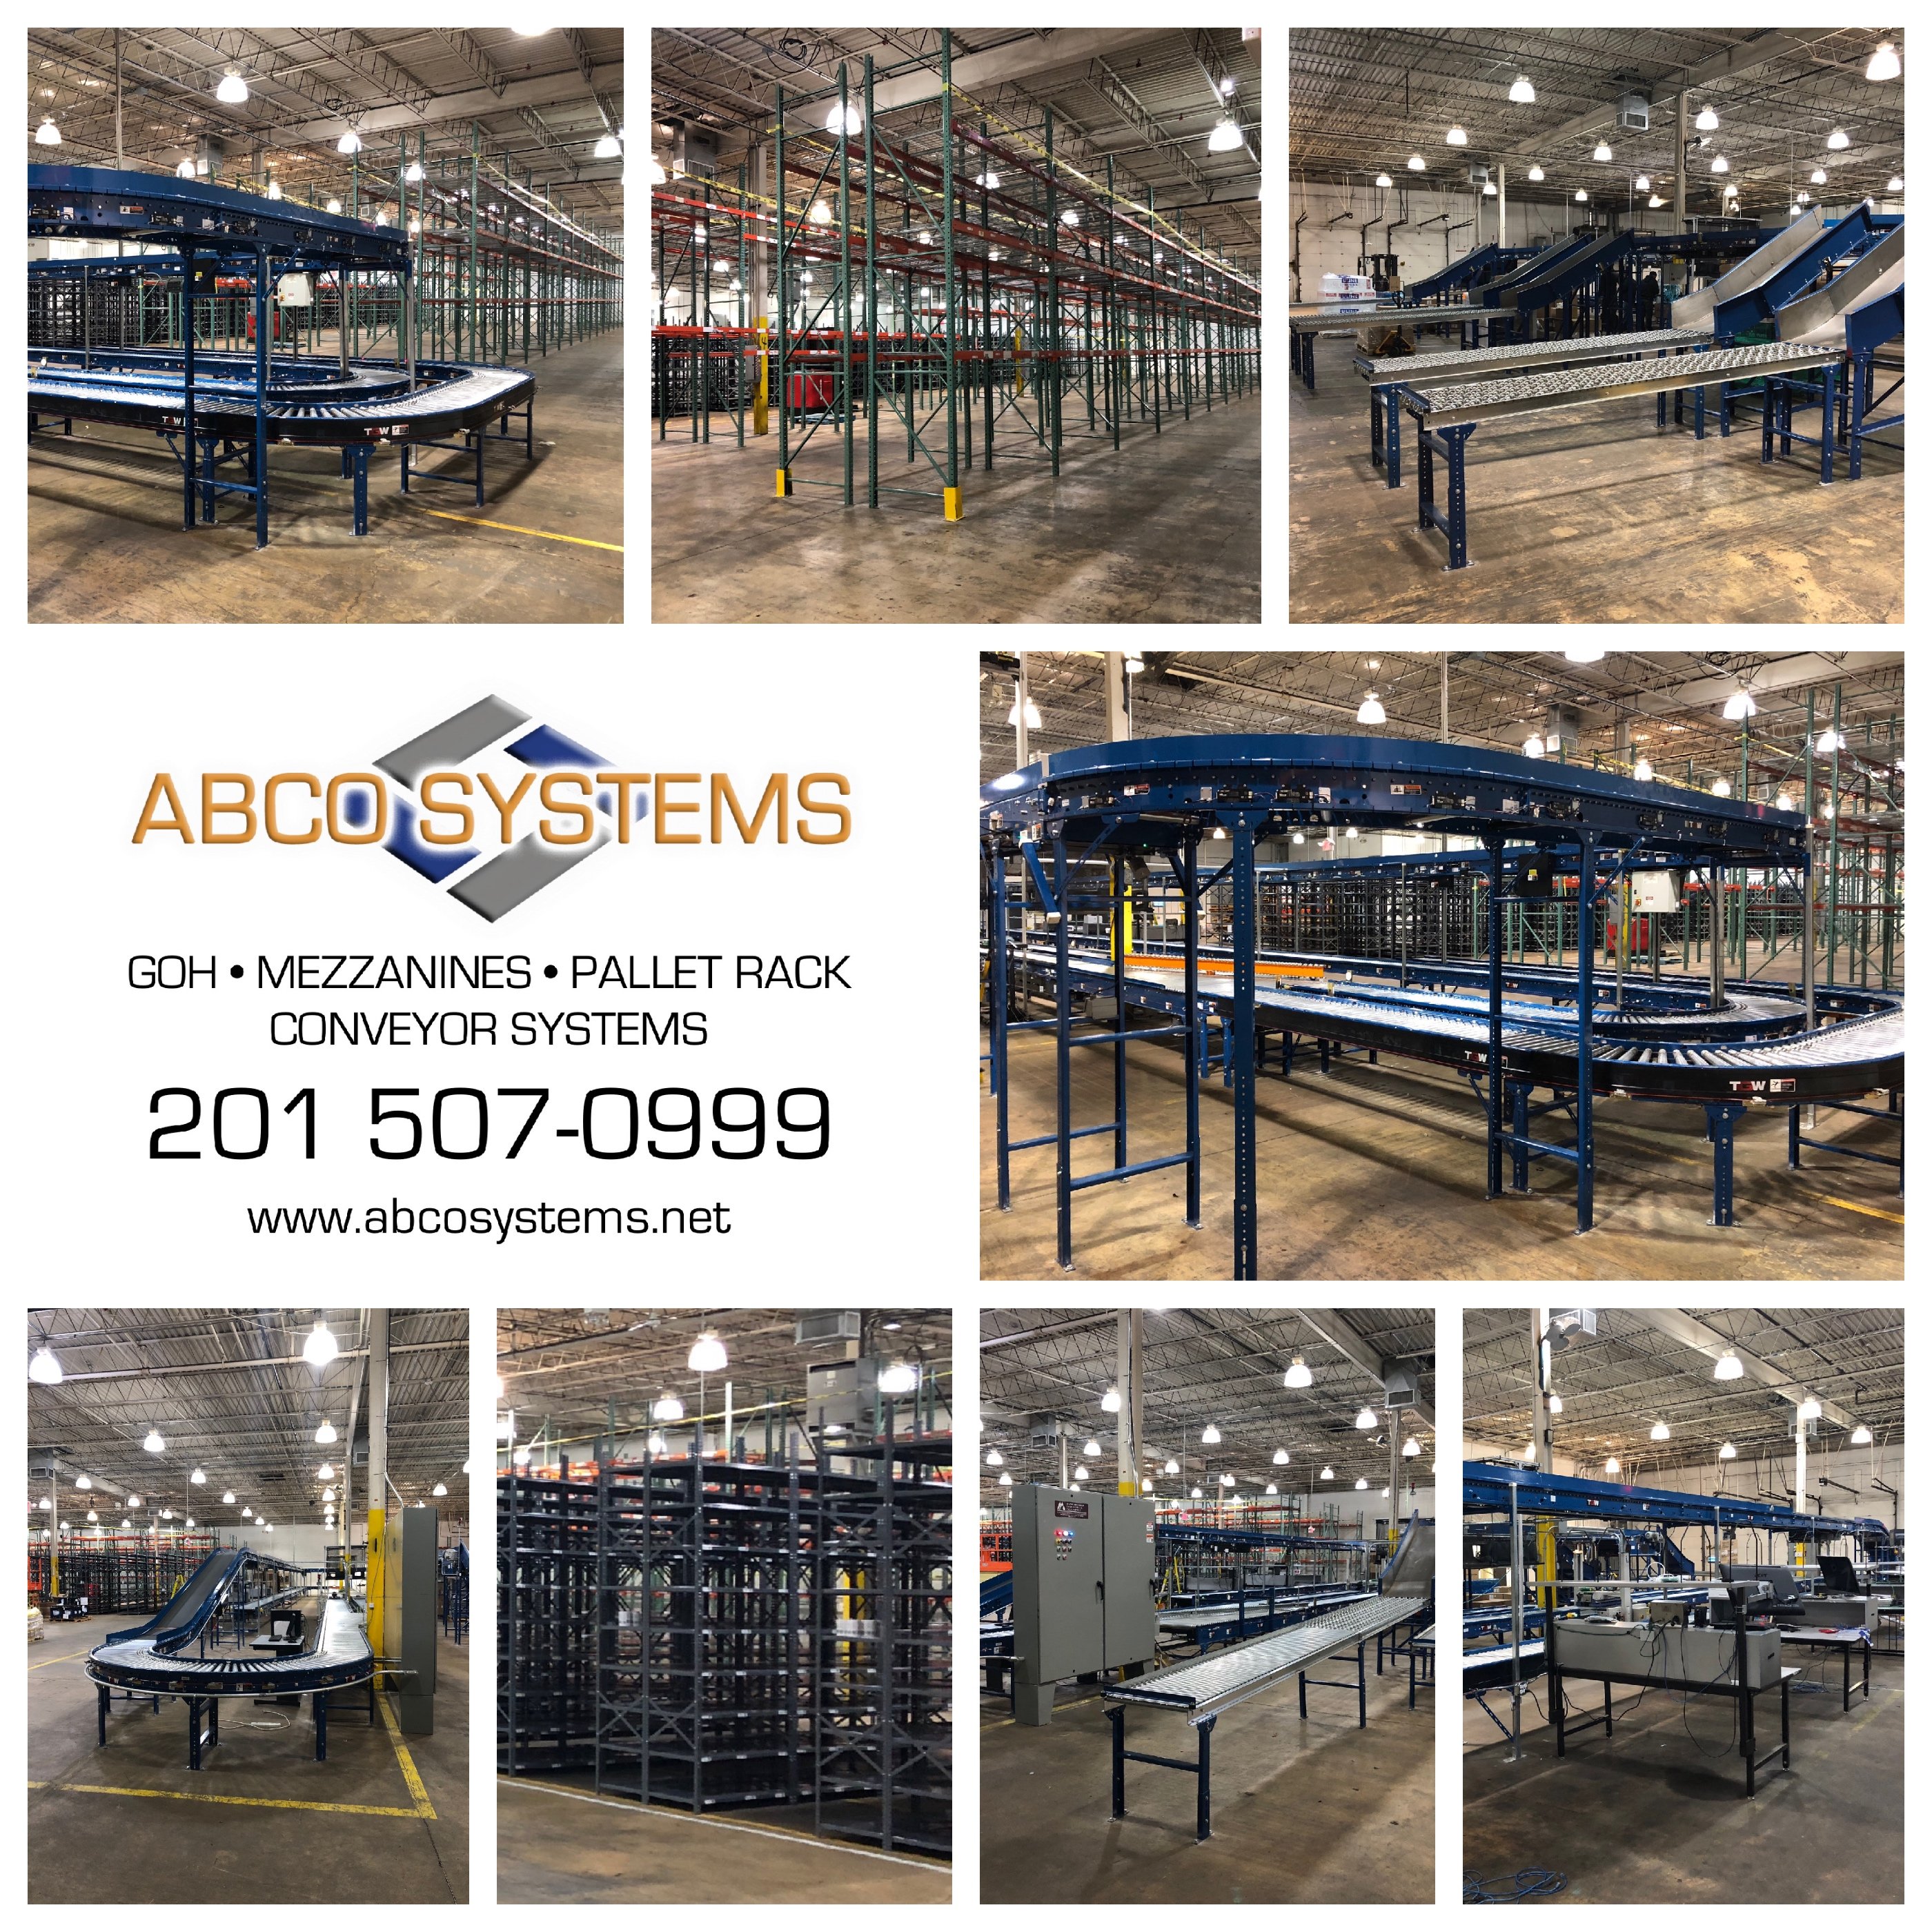 gallery of 8 photos displaying ABCO Systems warehouse design, pallet rack distributor, shelving, and conveyor belt systems